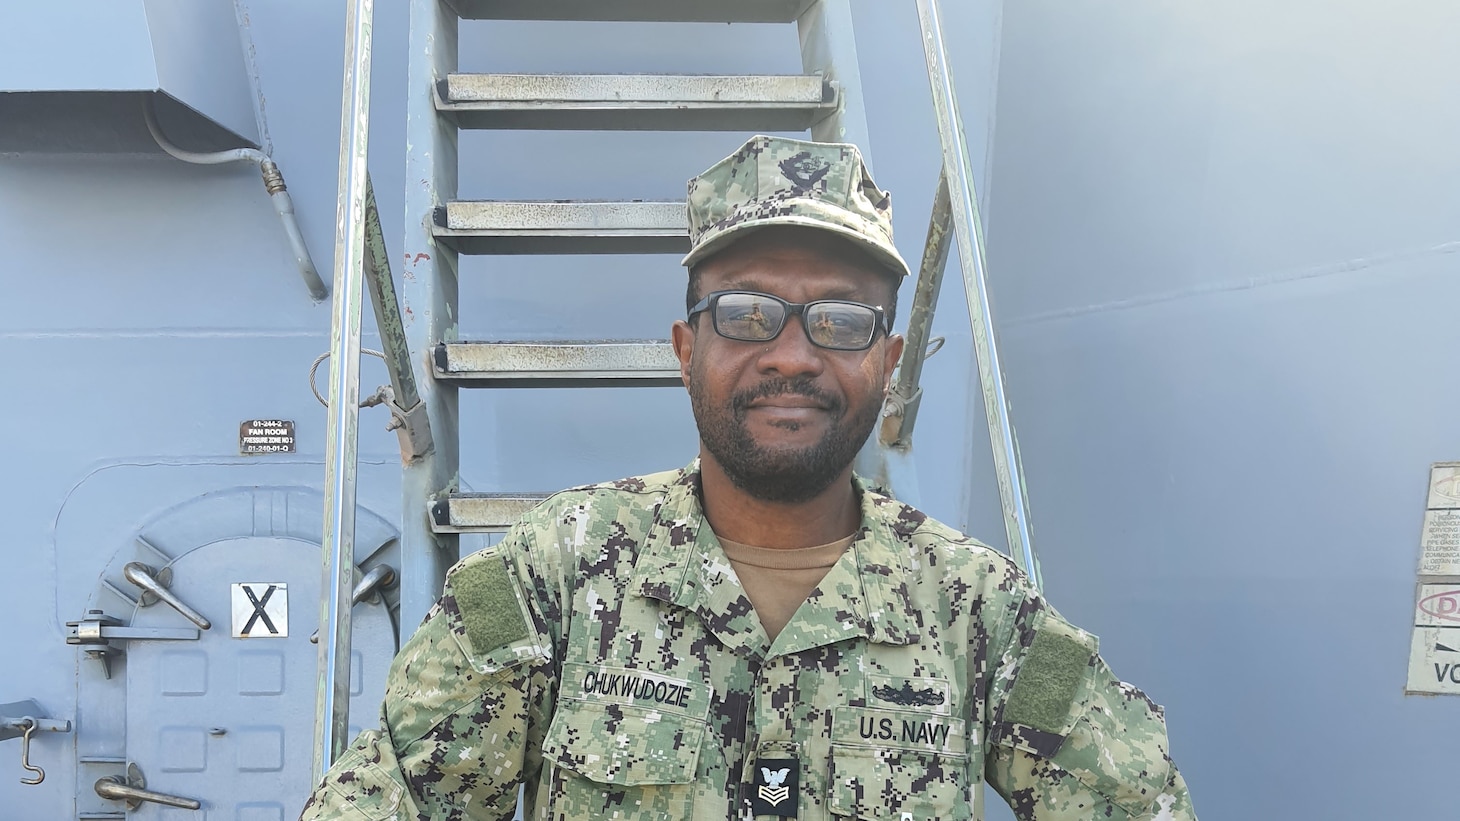 AQABA, Jordan (February 26, 2023) Hospital Corpsman 1st Class Ndudi Chukwudozie, of U.S. Navy Central Command’s Navy Reserve medical unit, poses for a photo aboard USS Truxtun (DDG 103) at the Royal Jordanian Naval Base in Aqaba, Jordan during International Maritime Exercise/Cutlass Express 2023. IMX/CE 2023 is the largest multinational training event in the Middle East, involving 7,000 personnel from more than 50 nations and international organizations committed to preserving the rules-based international order and strengthening regional maritime security cooperation. (U.S. Navy photo by Hospital Corpsman 1st Class Emilio Molina)